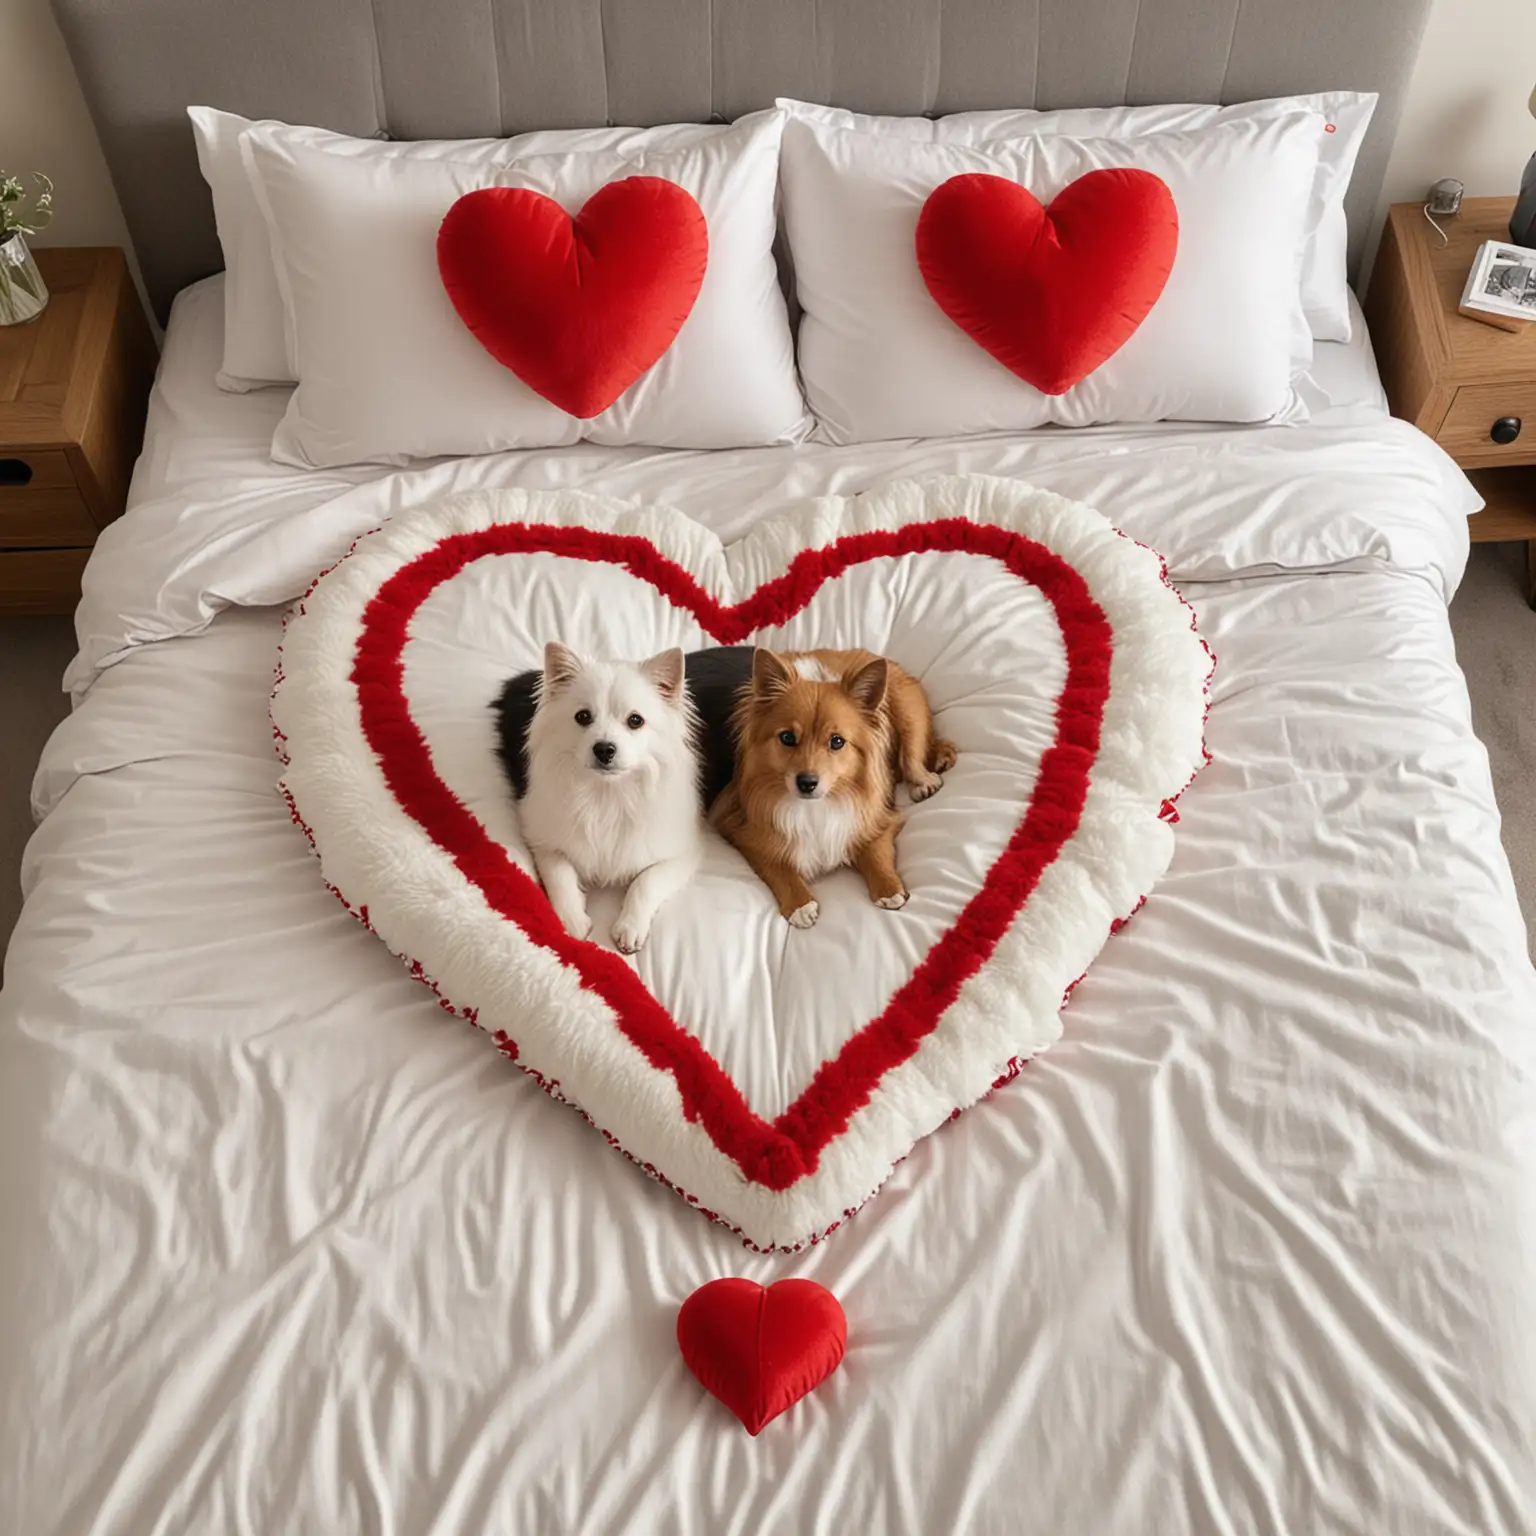 Dog and Cat Relaxing on Bed with Heartshaped Cushion